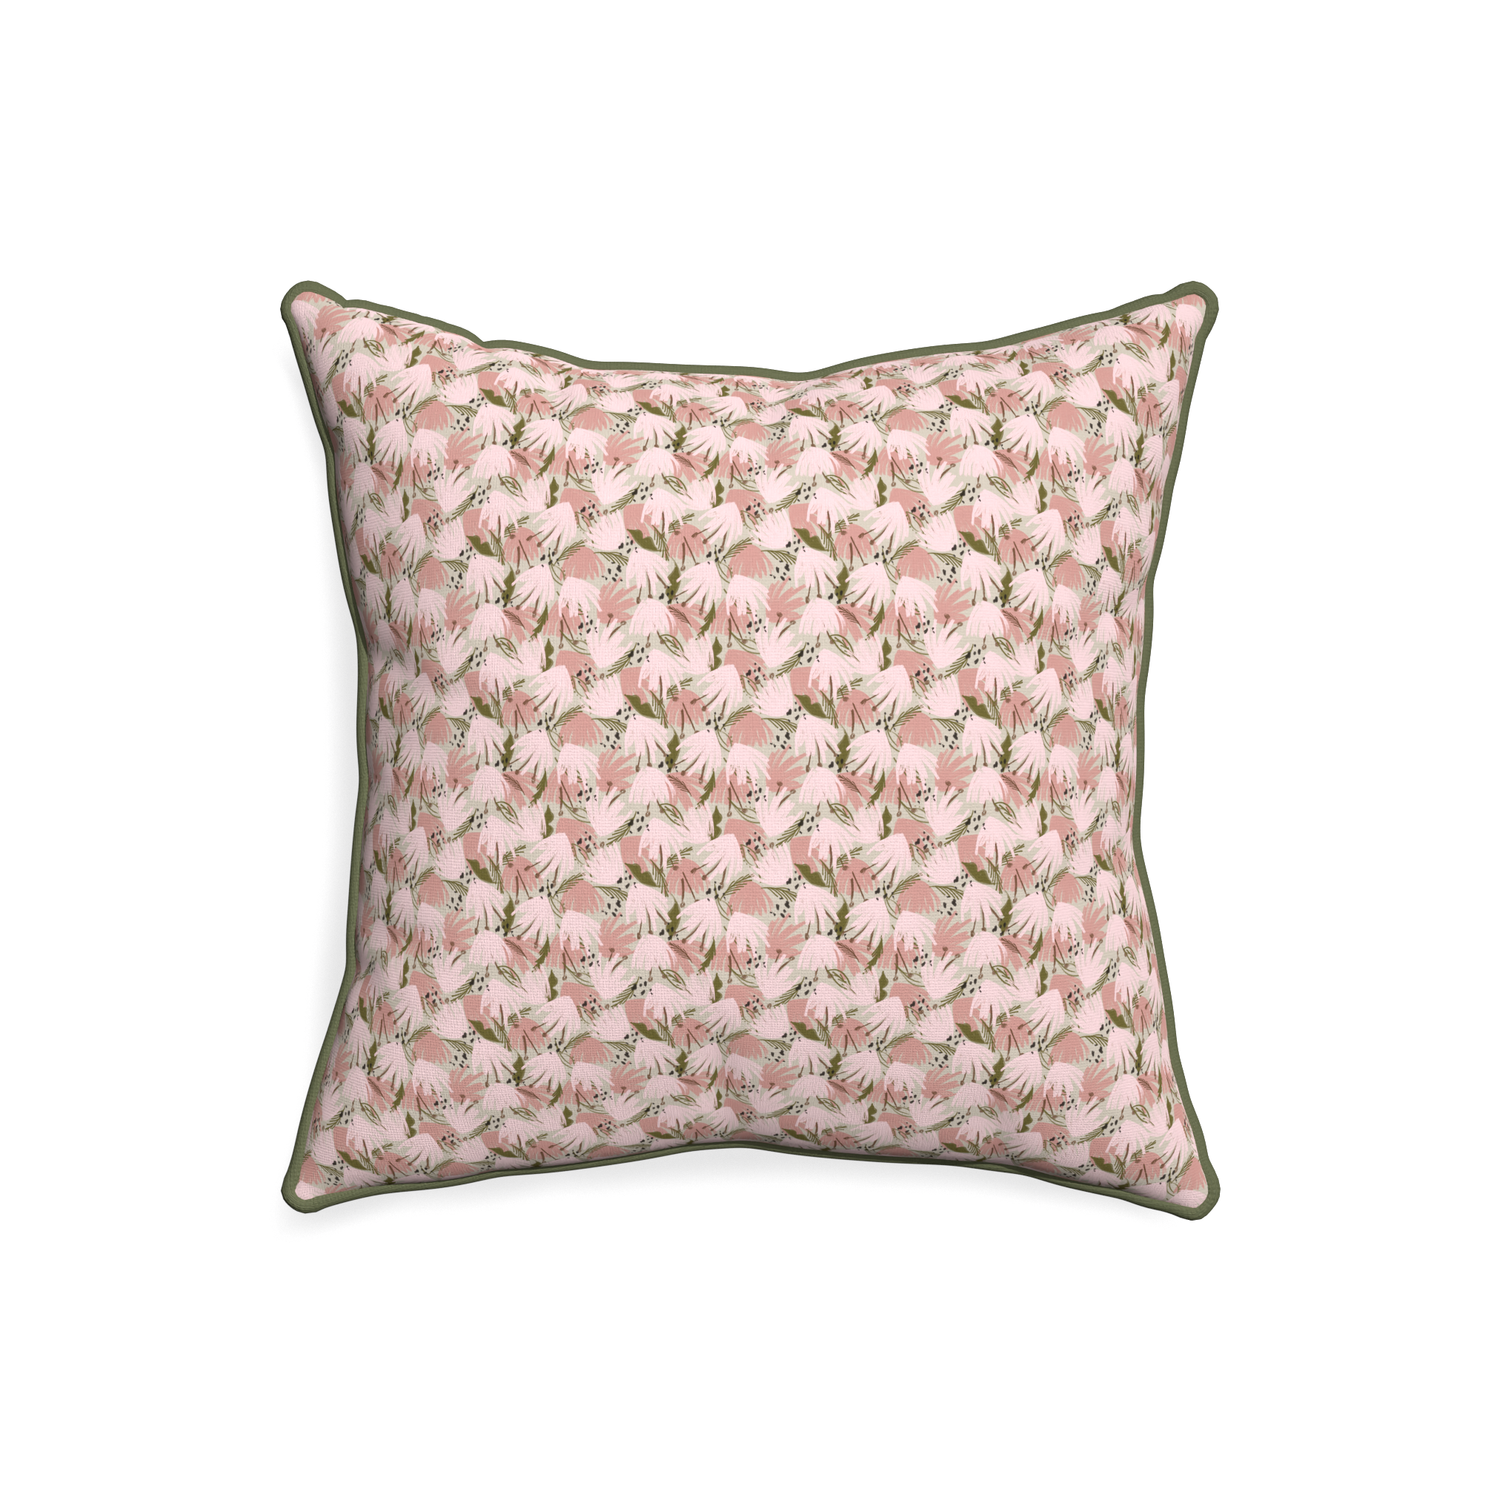 20-square eden pink custom pillow with f piping on white background